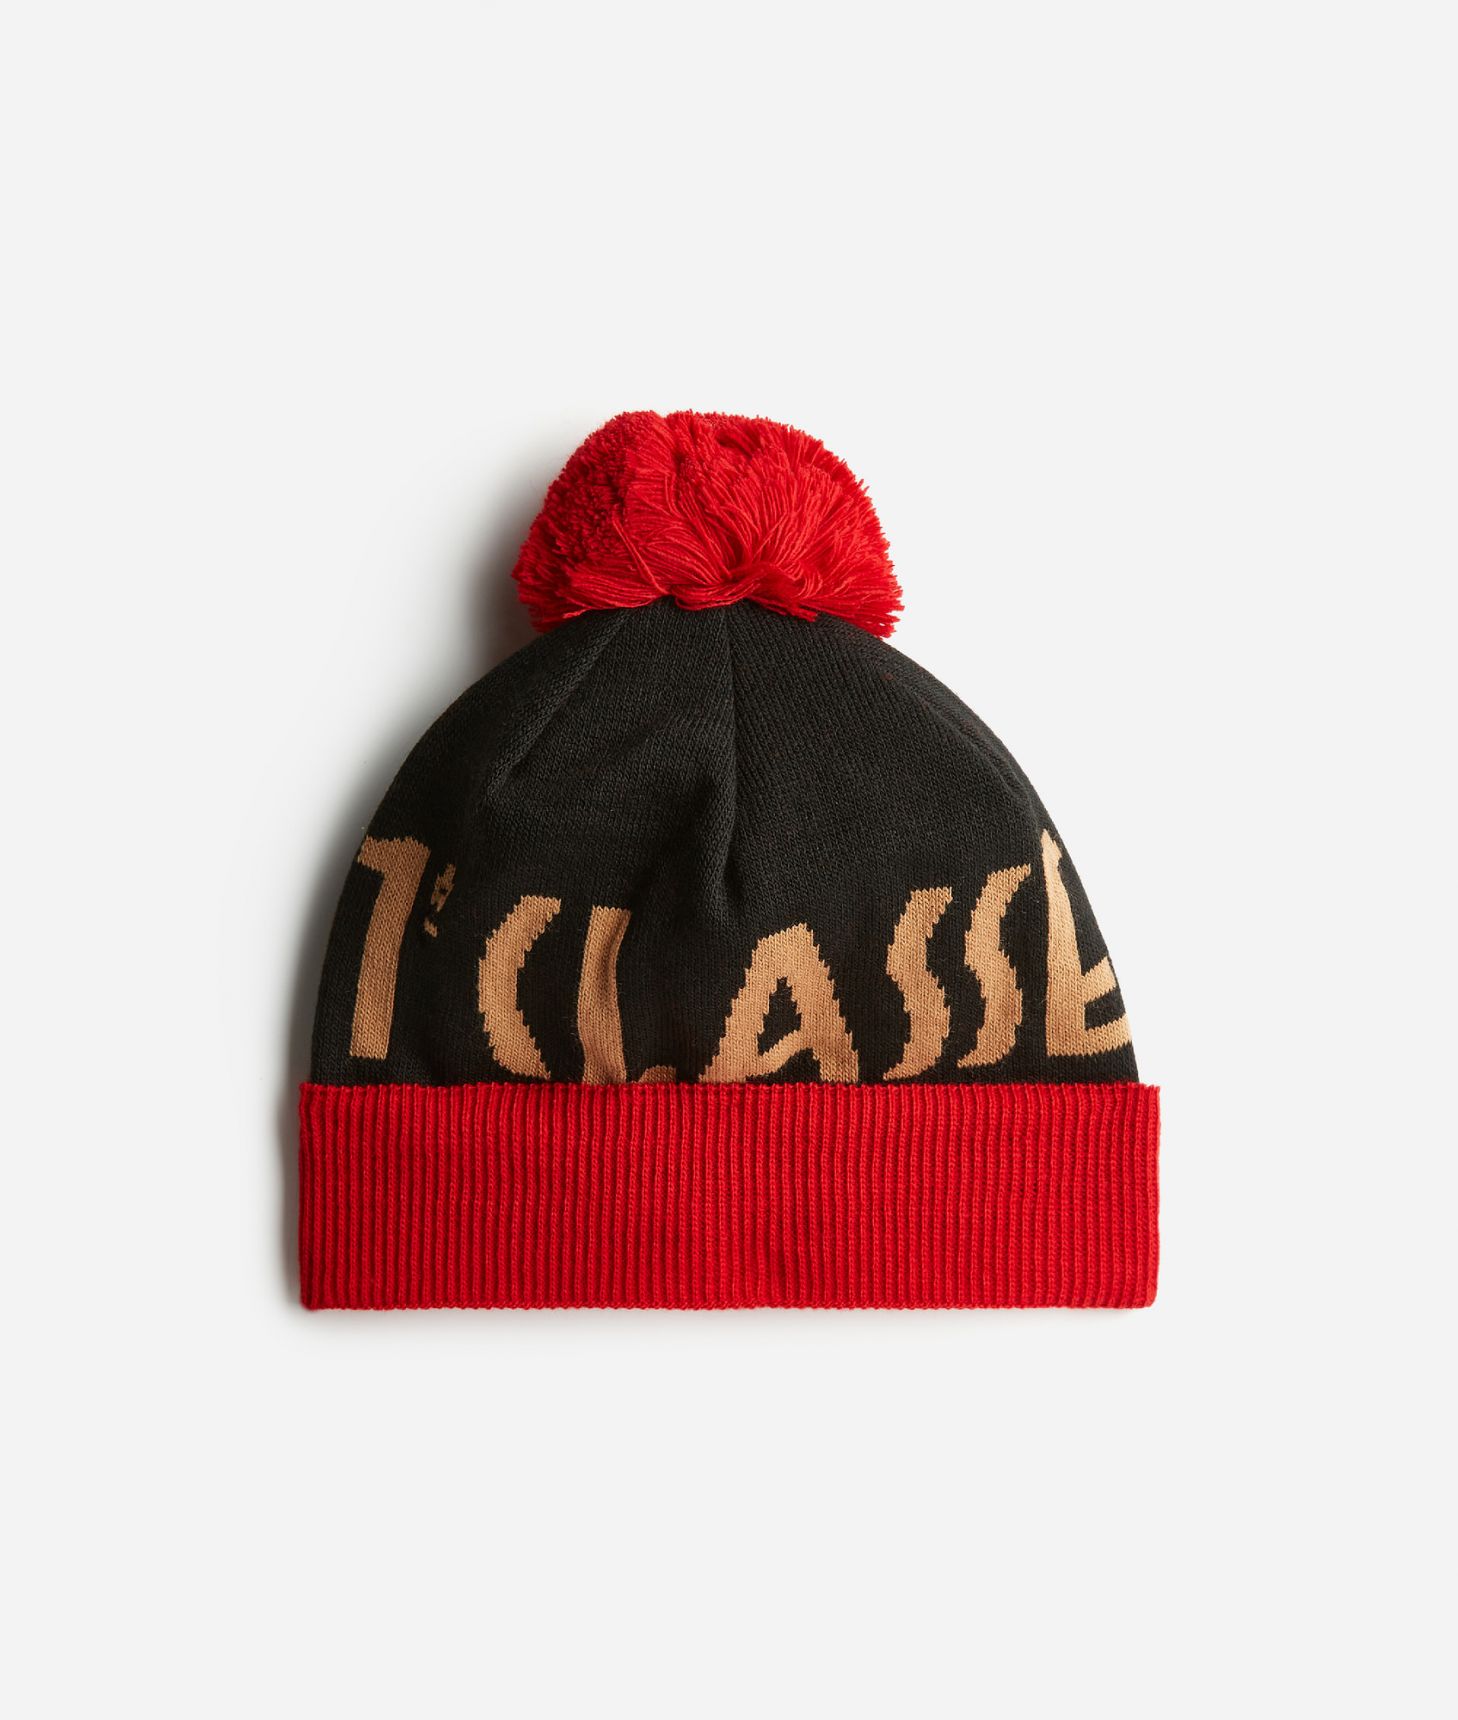 1ᴬ Classe hat with pon pon Black,front